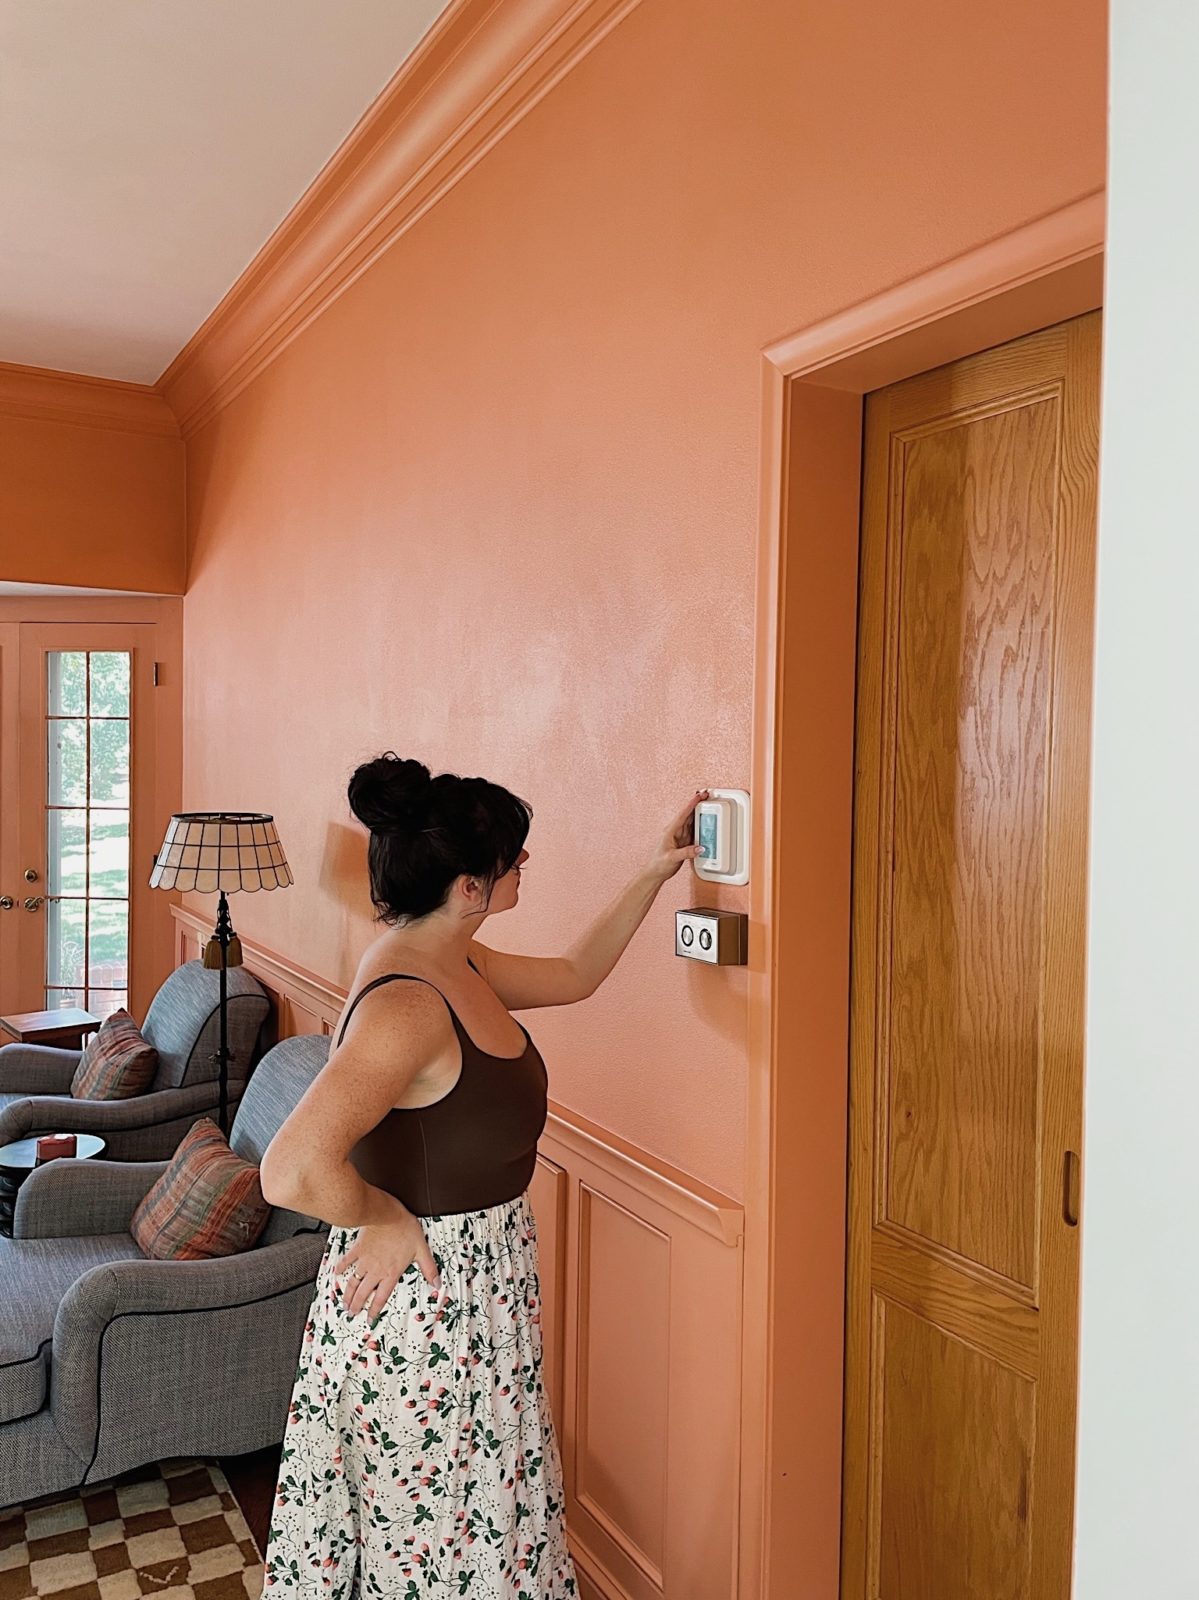 Woman in a peach room setting a thermostat